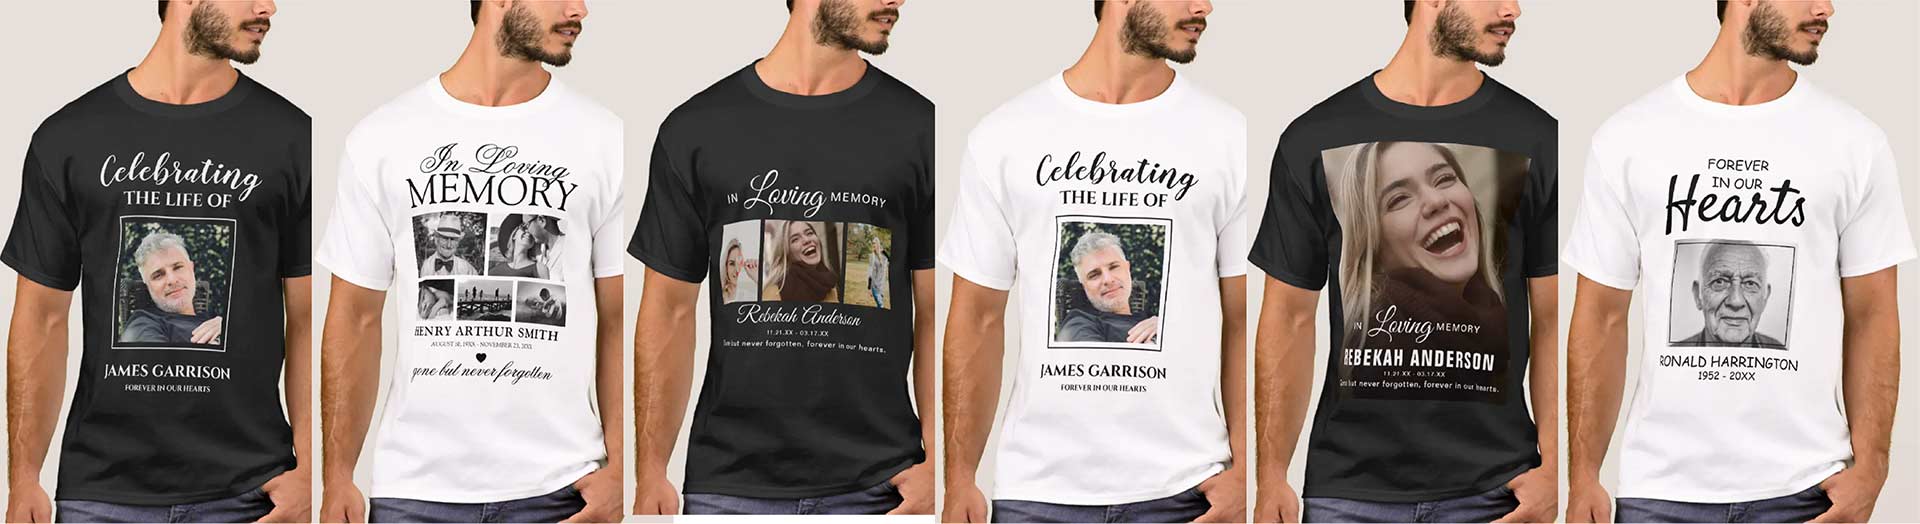 Memorial-Shirts--Best-Way-To-Honor-Your-Loved-One